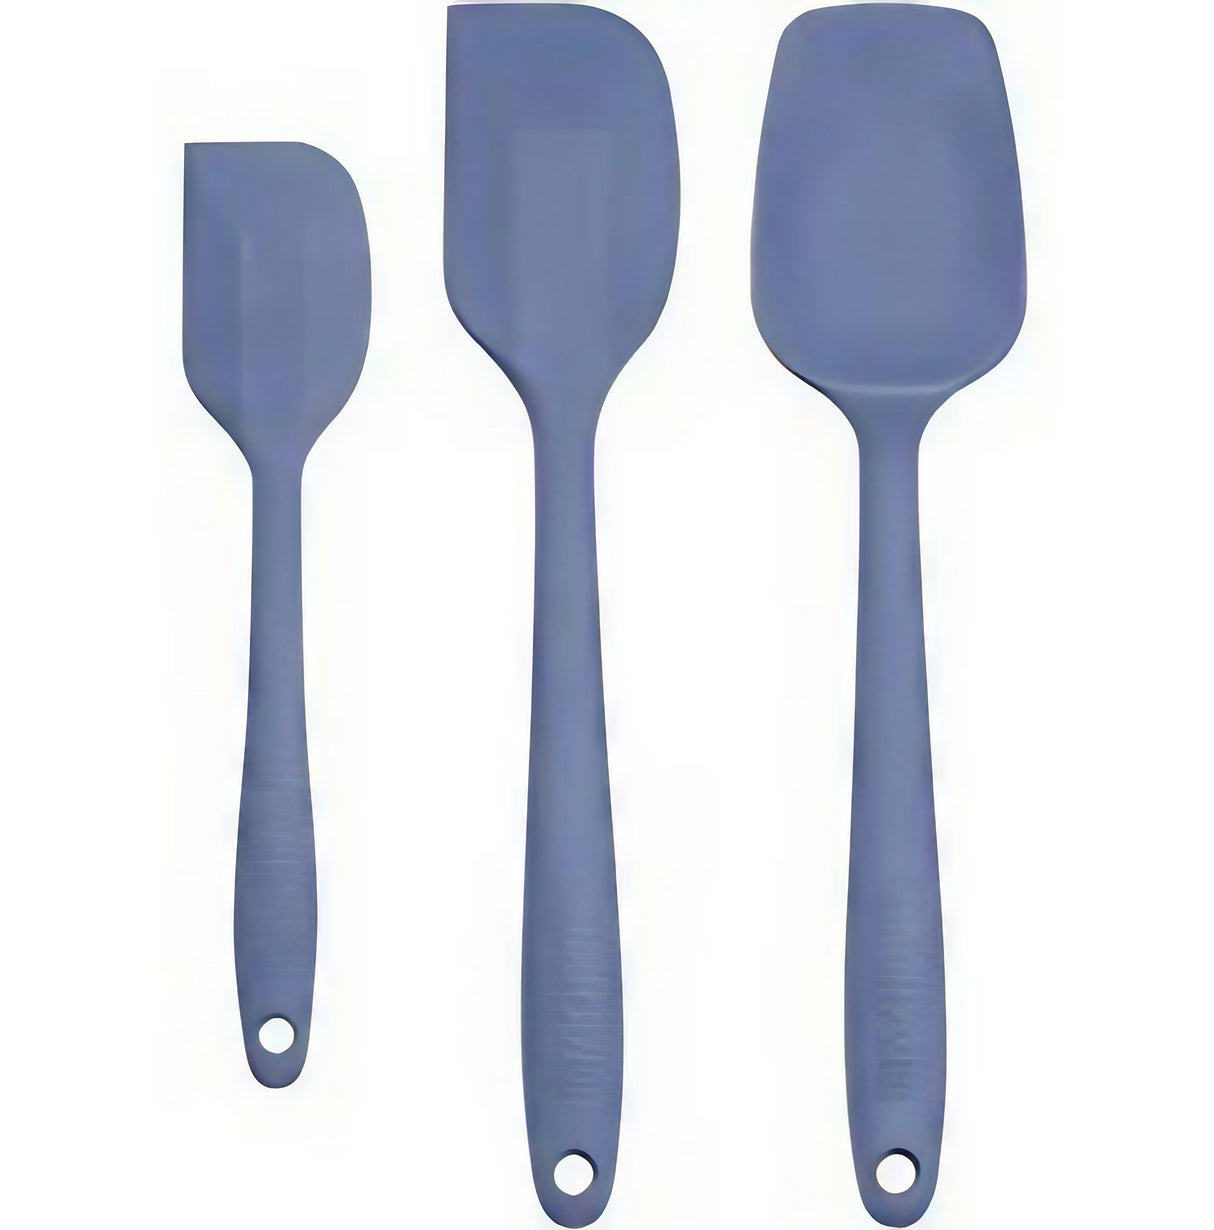 MagicalButter Silicone Spatulas 3 Pack in blue, front view on a white background, durable and easy to clean